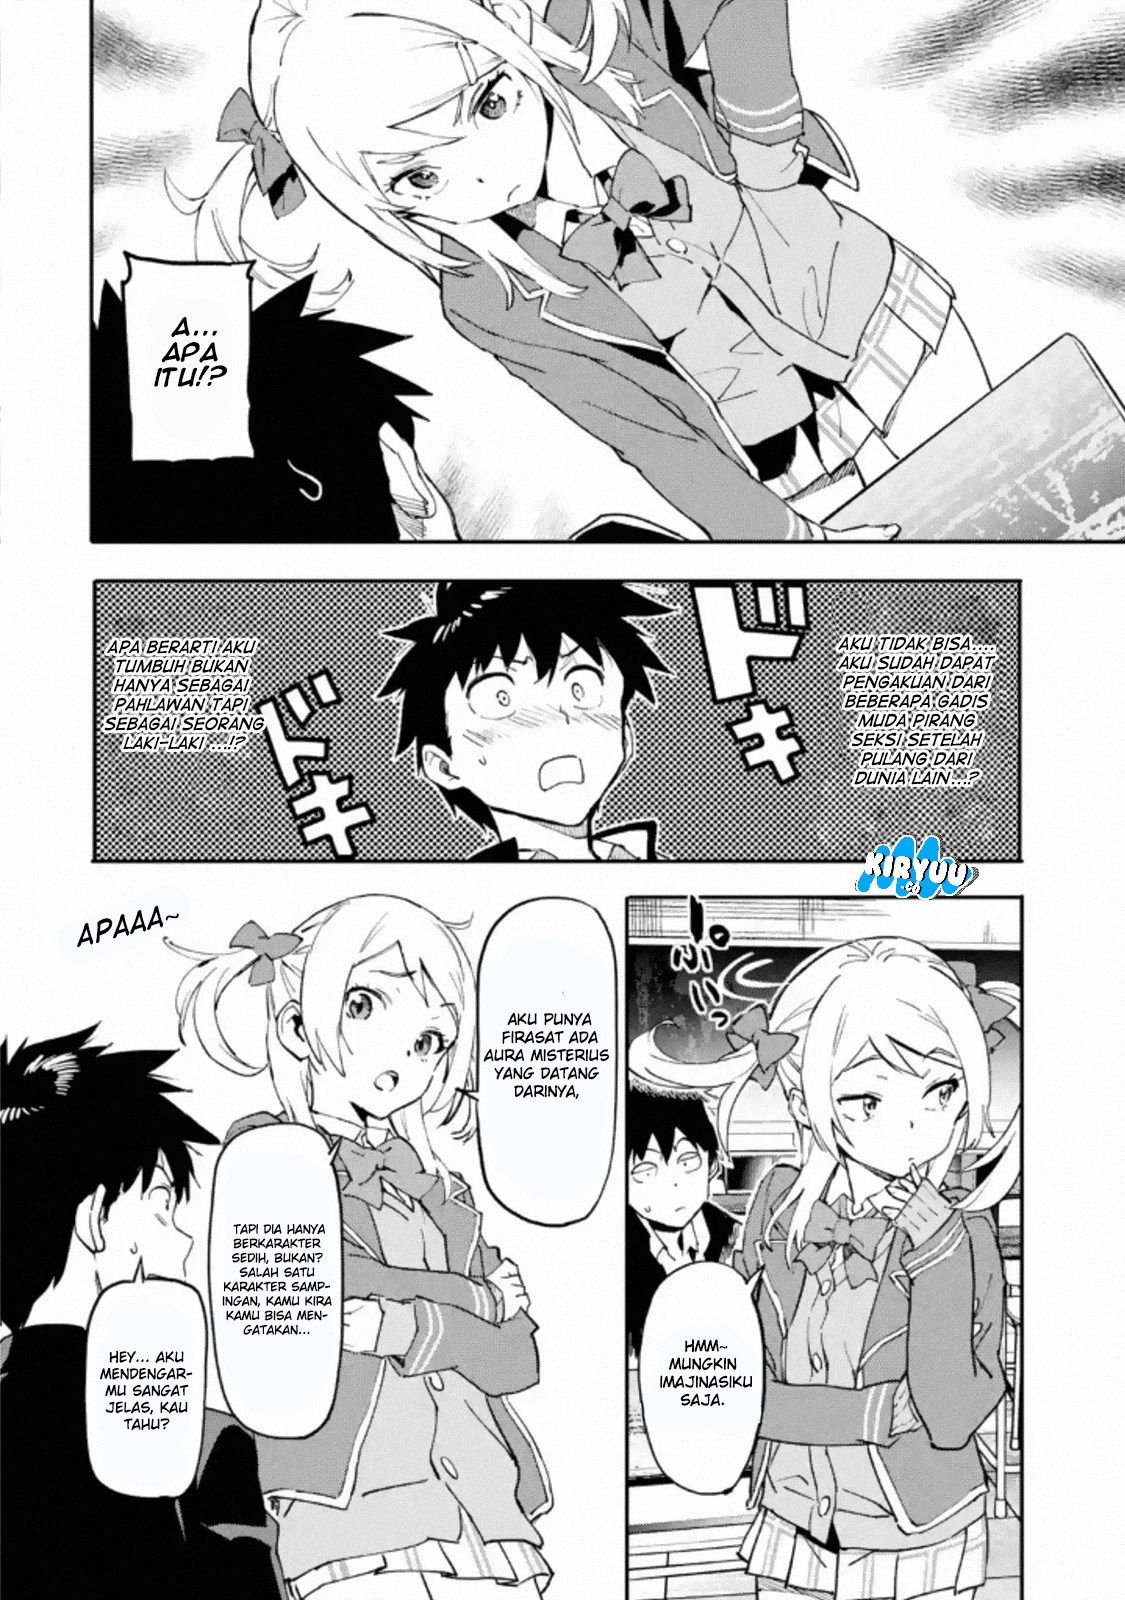 The Hero Who Returned Remains the Strongest in the Modern World Chapter 2-1